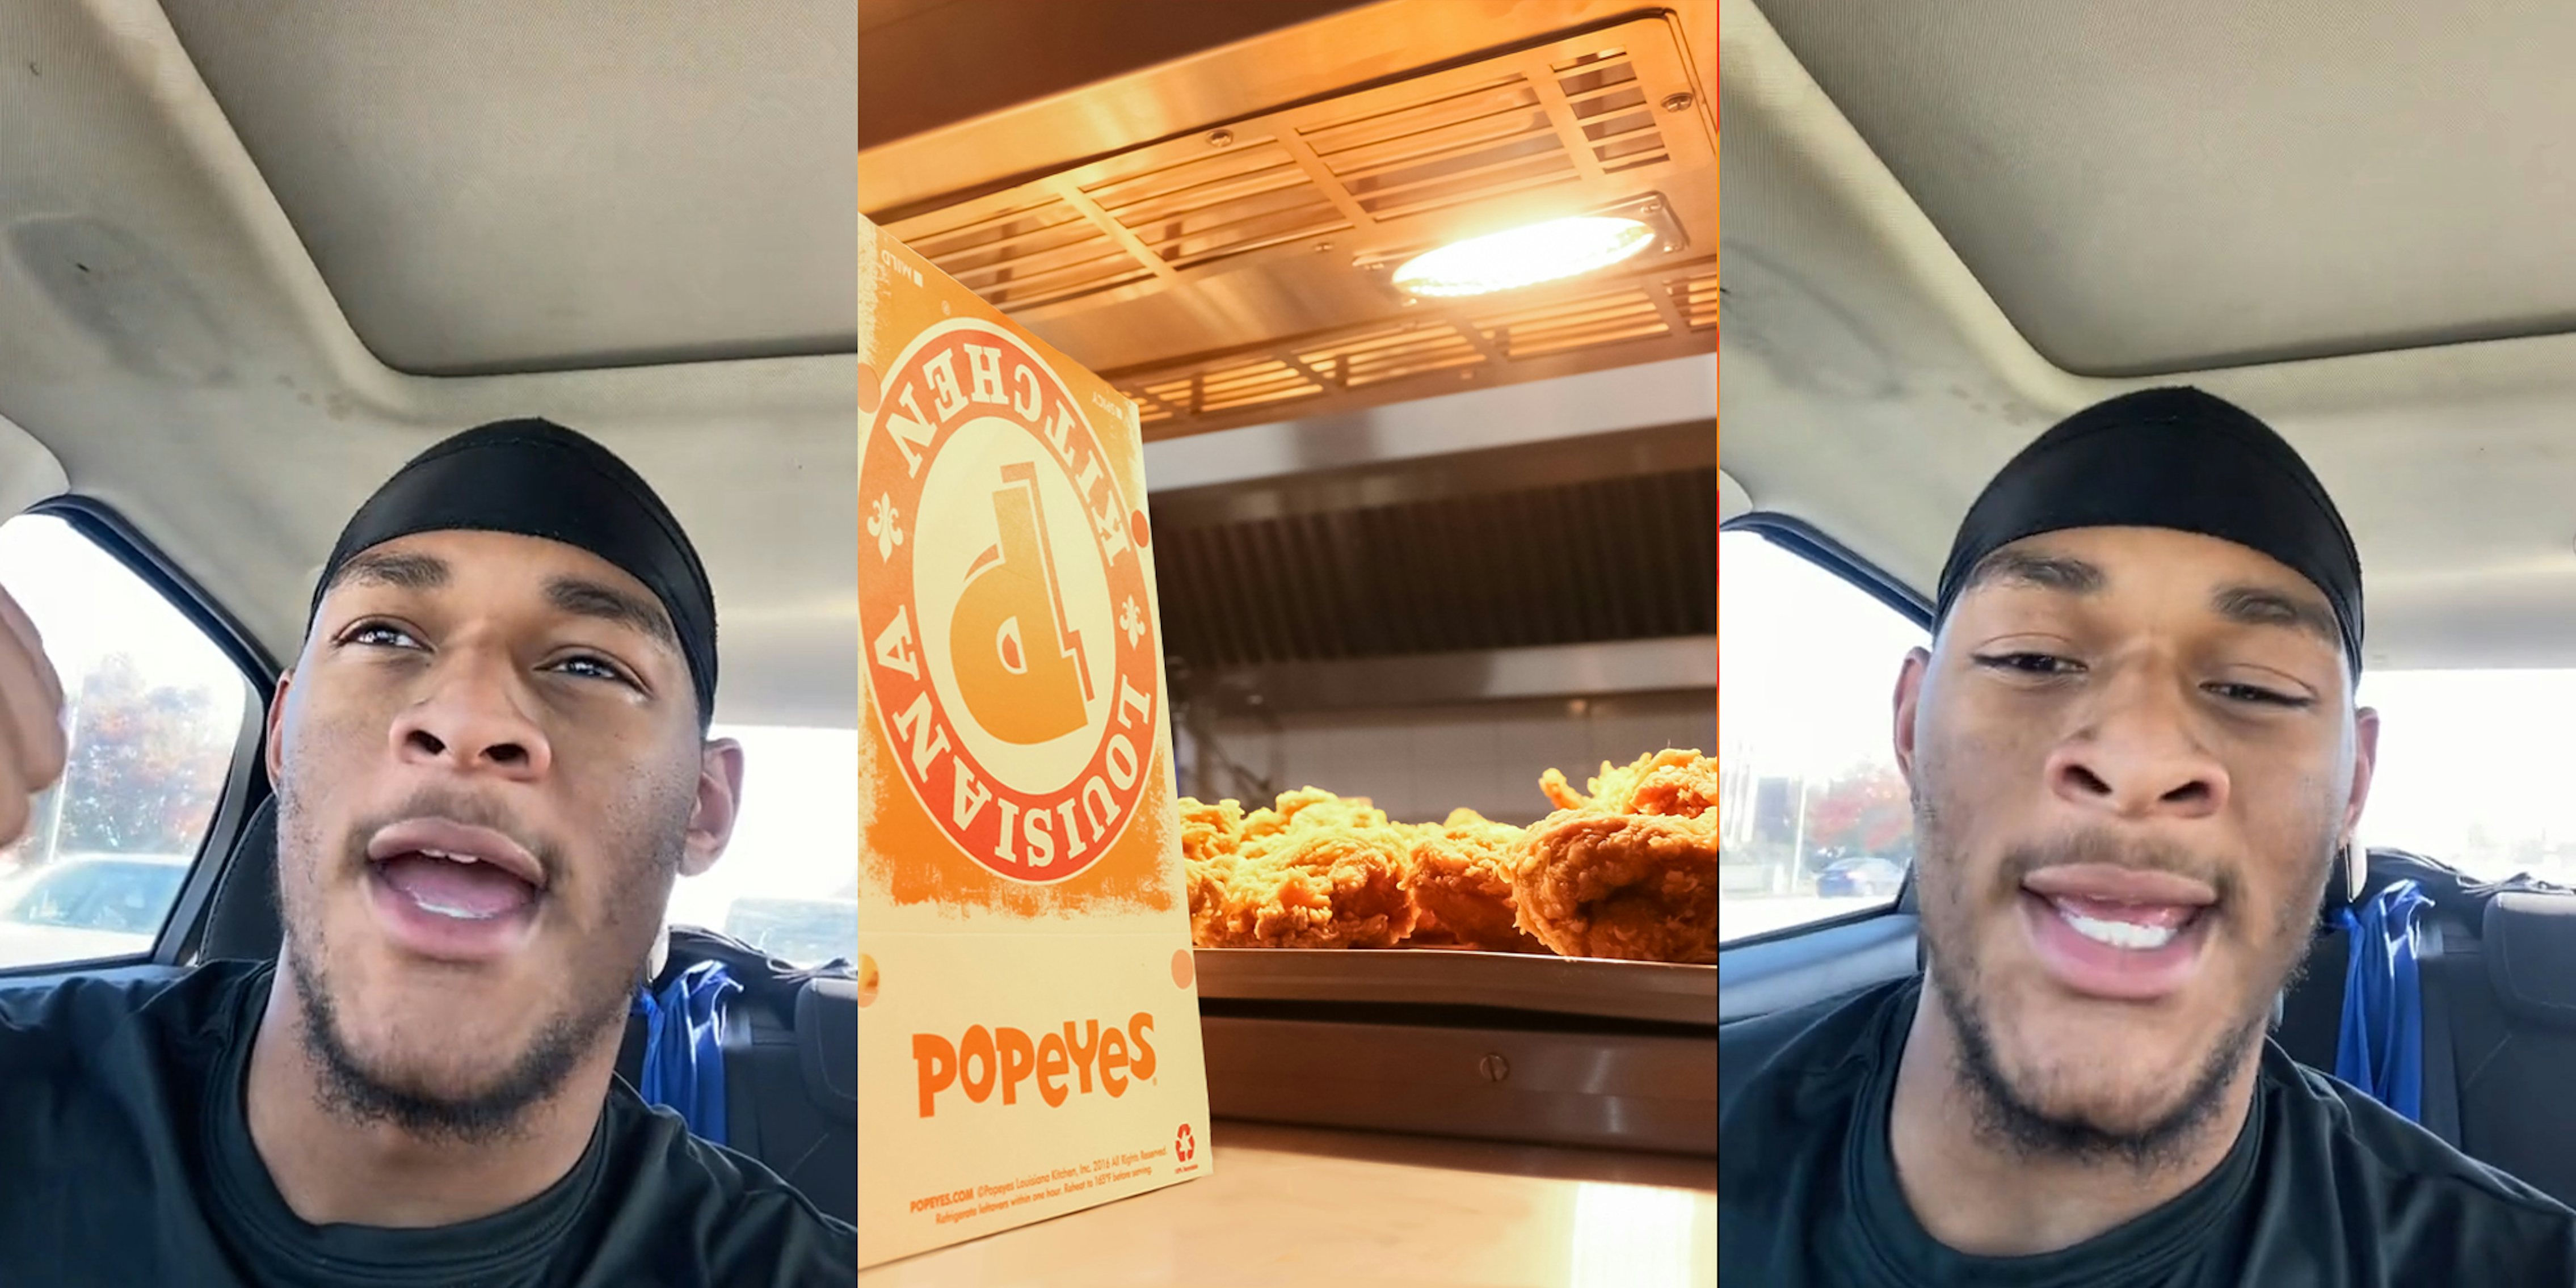 man speaking in car with hand up (l) Popeyes fried chicken in kitchen with paper sign on counter (c) man speaking in car (r)